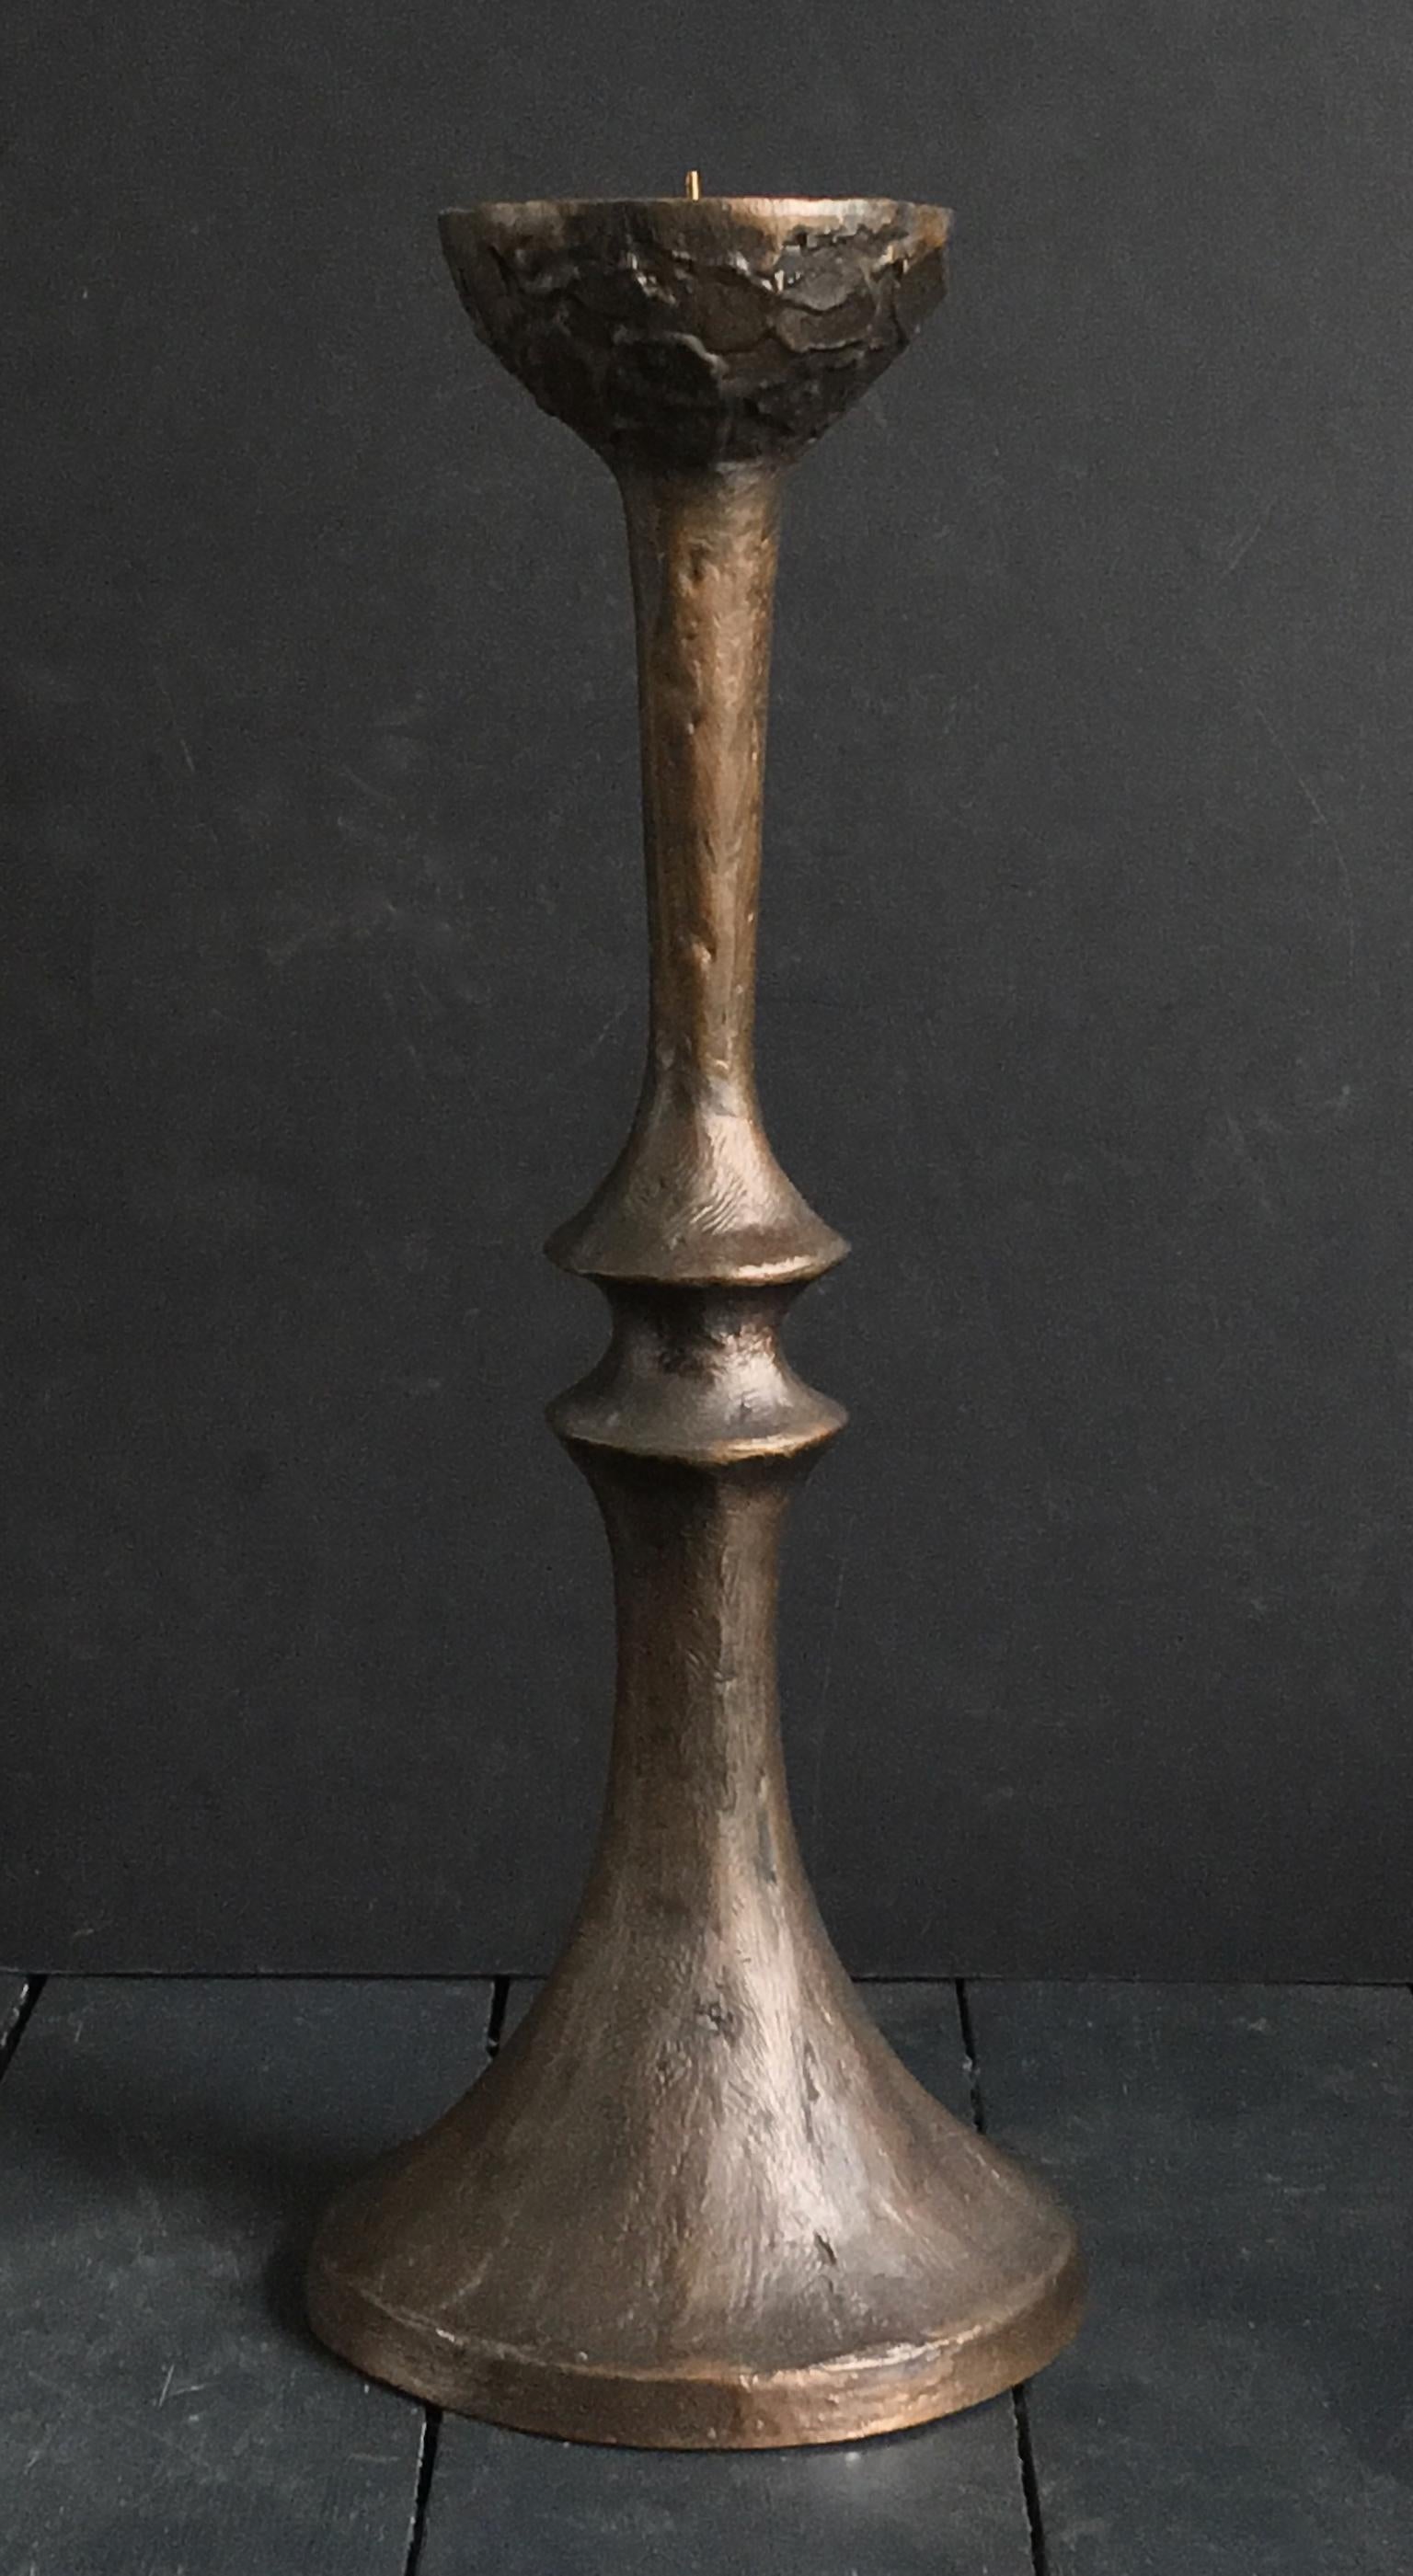 Large scale Brutalist church candlestick of cast bronze, mid-20th century, Germany.

A heavy sculptural piece in very good vintage condition with a deep brown patina, which we have left as found. There are minor signs of age-appropriate wear and